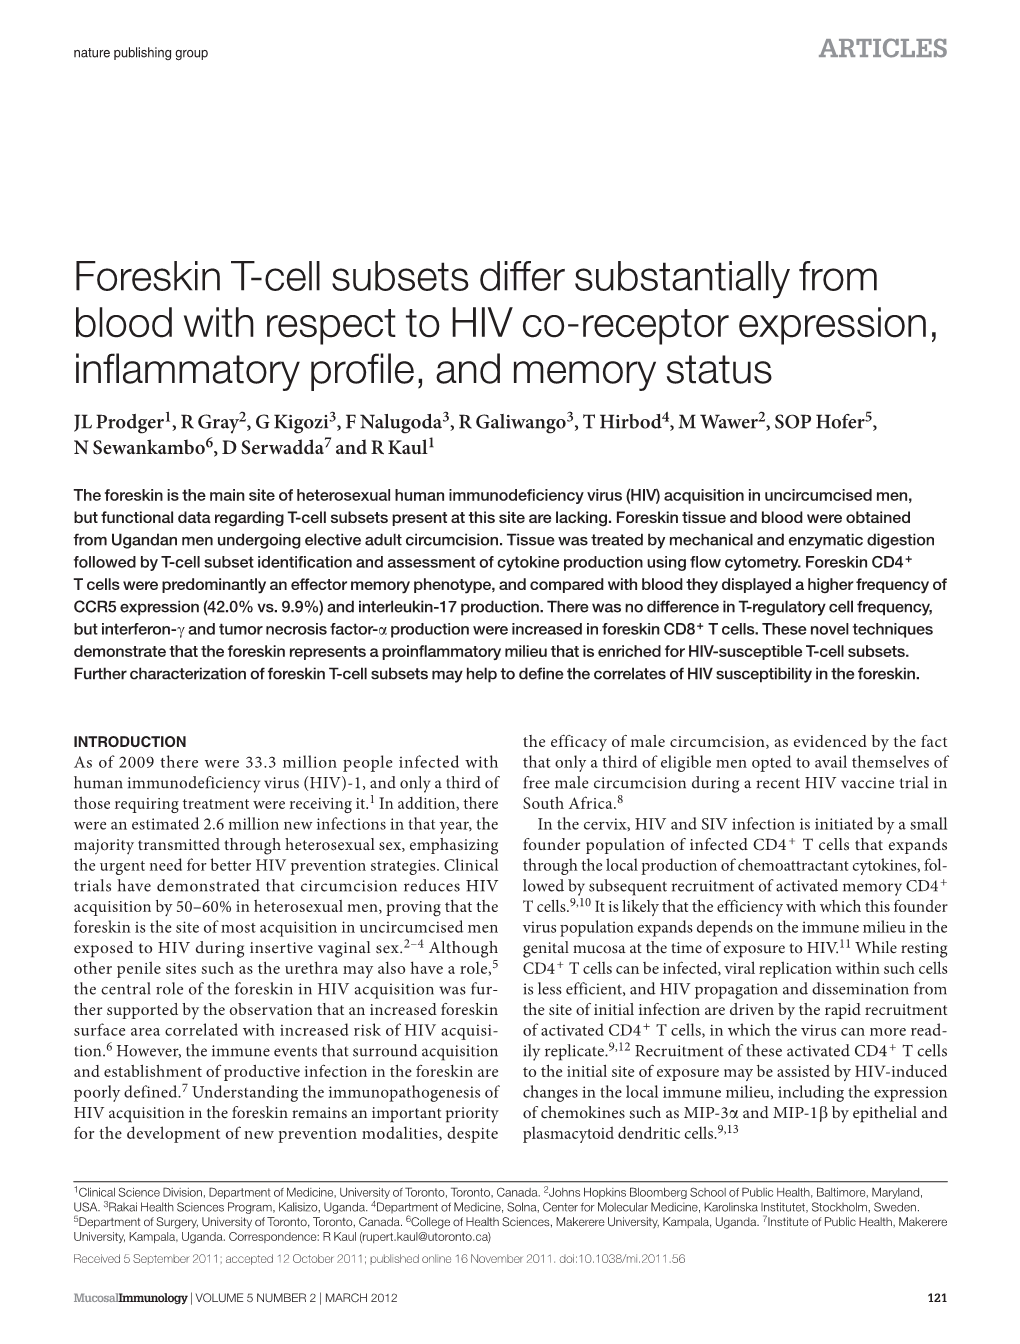 Foreskin T-Cell Subsets Differ Substantially from Blood with Respect to HIV Co-Receptor Expression, Inflammatory Profile, and Memory Status